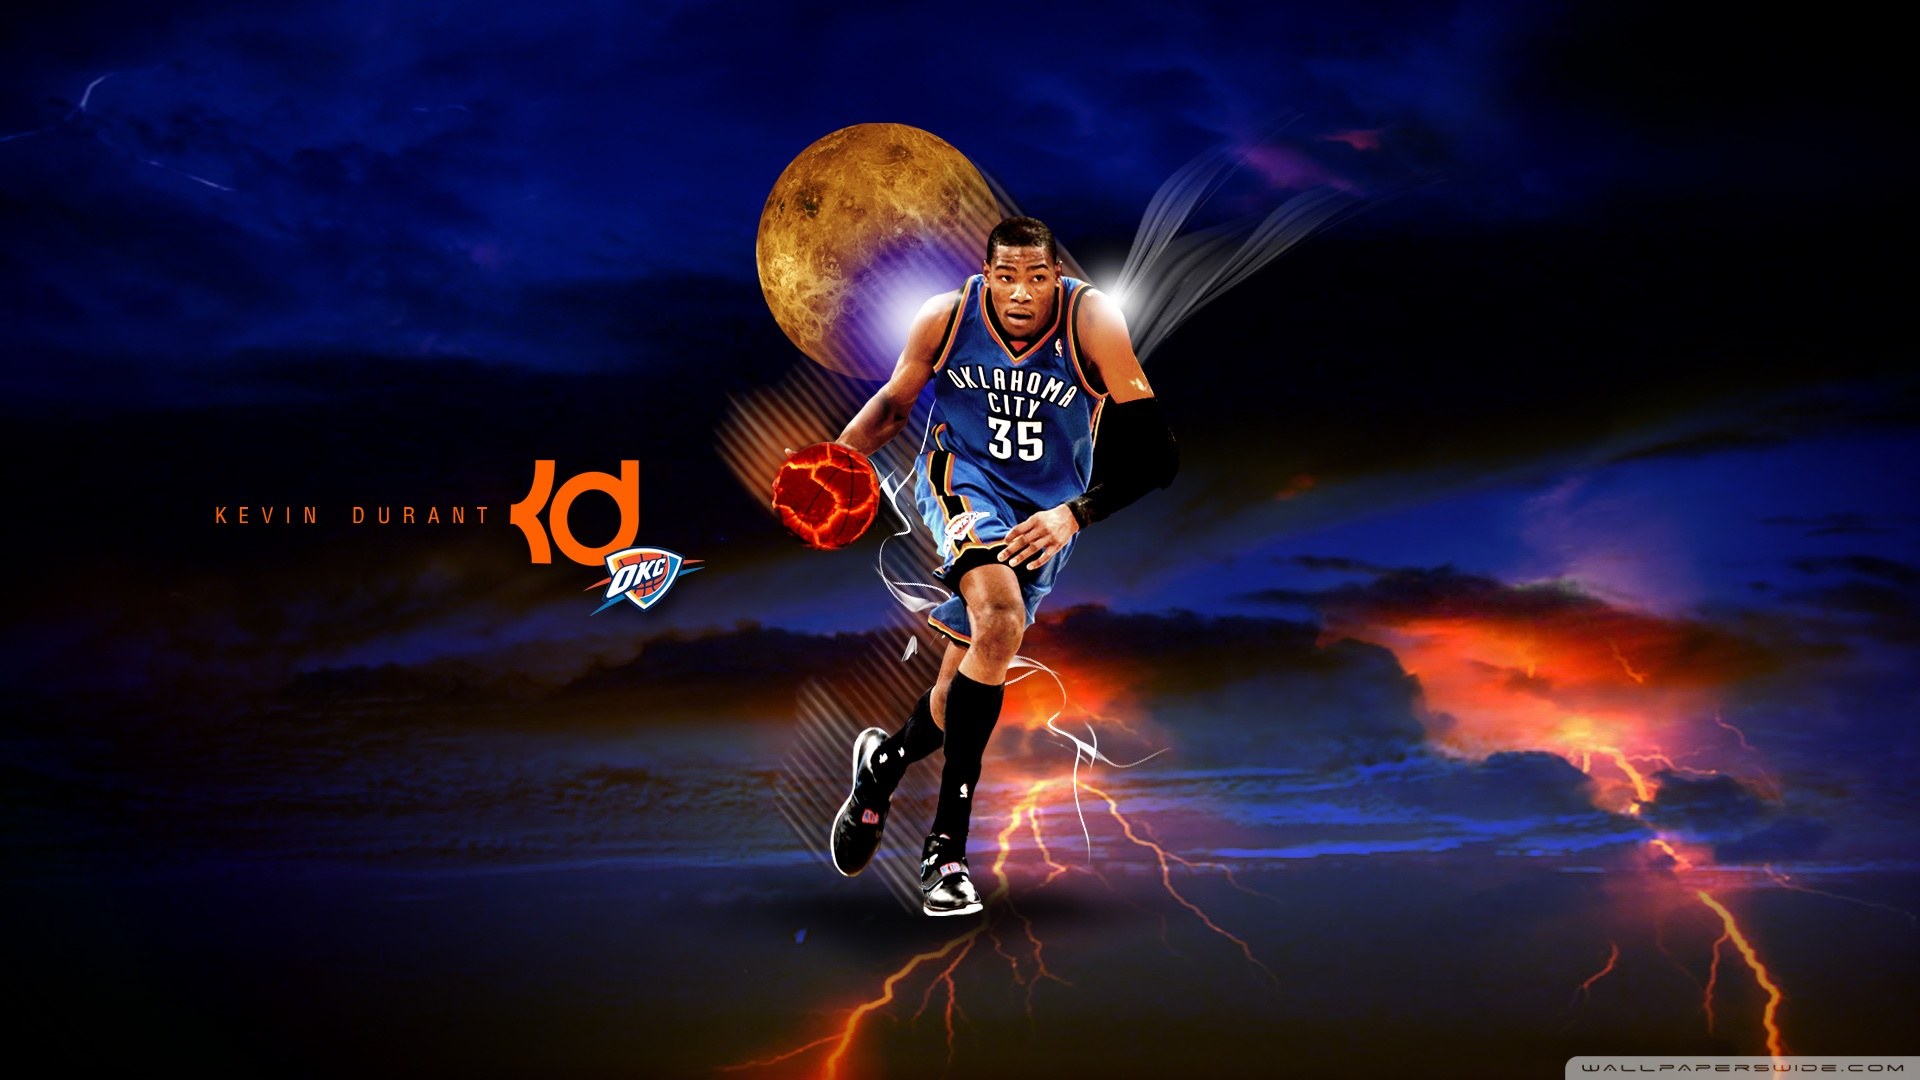 City Basketball Oklahoma Number Kevin Durant Wallpaper Cool